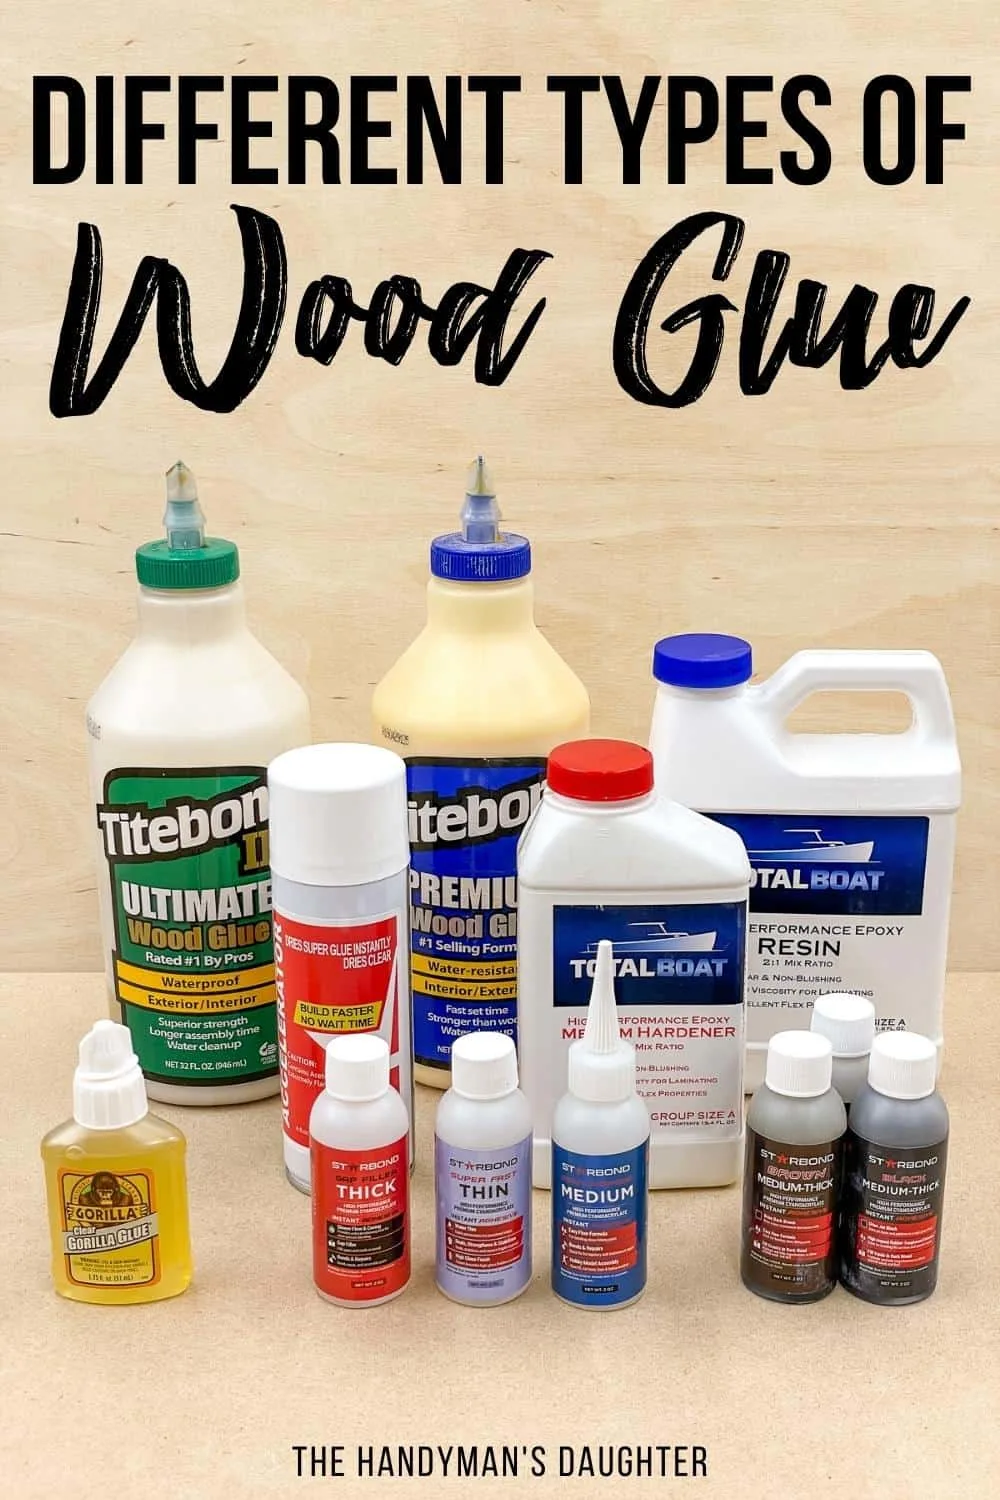 what is stronger hot glue or wood glue?